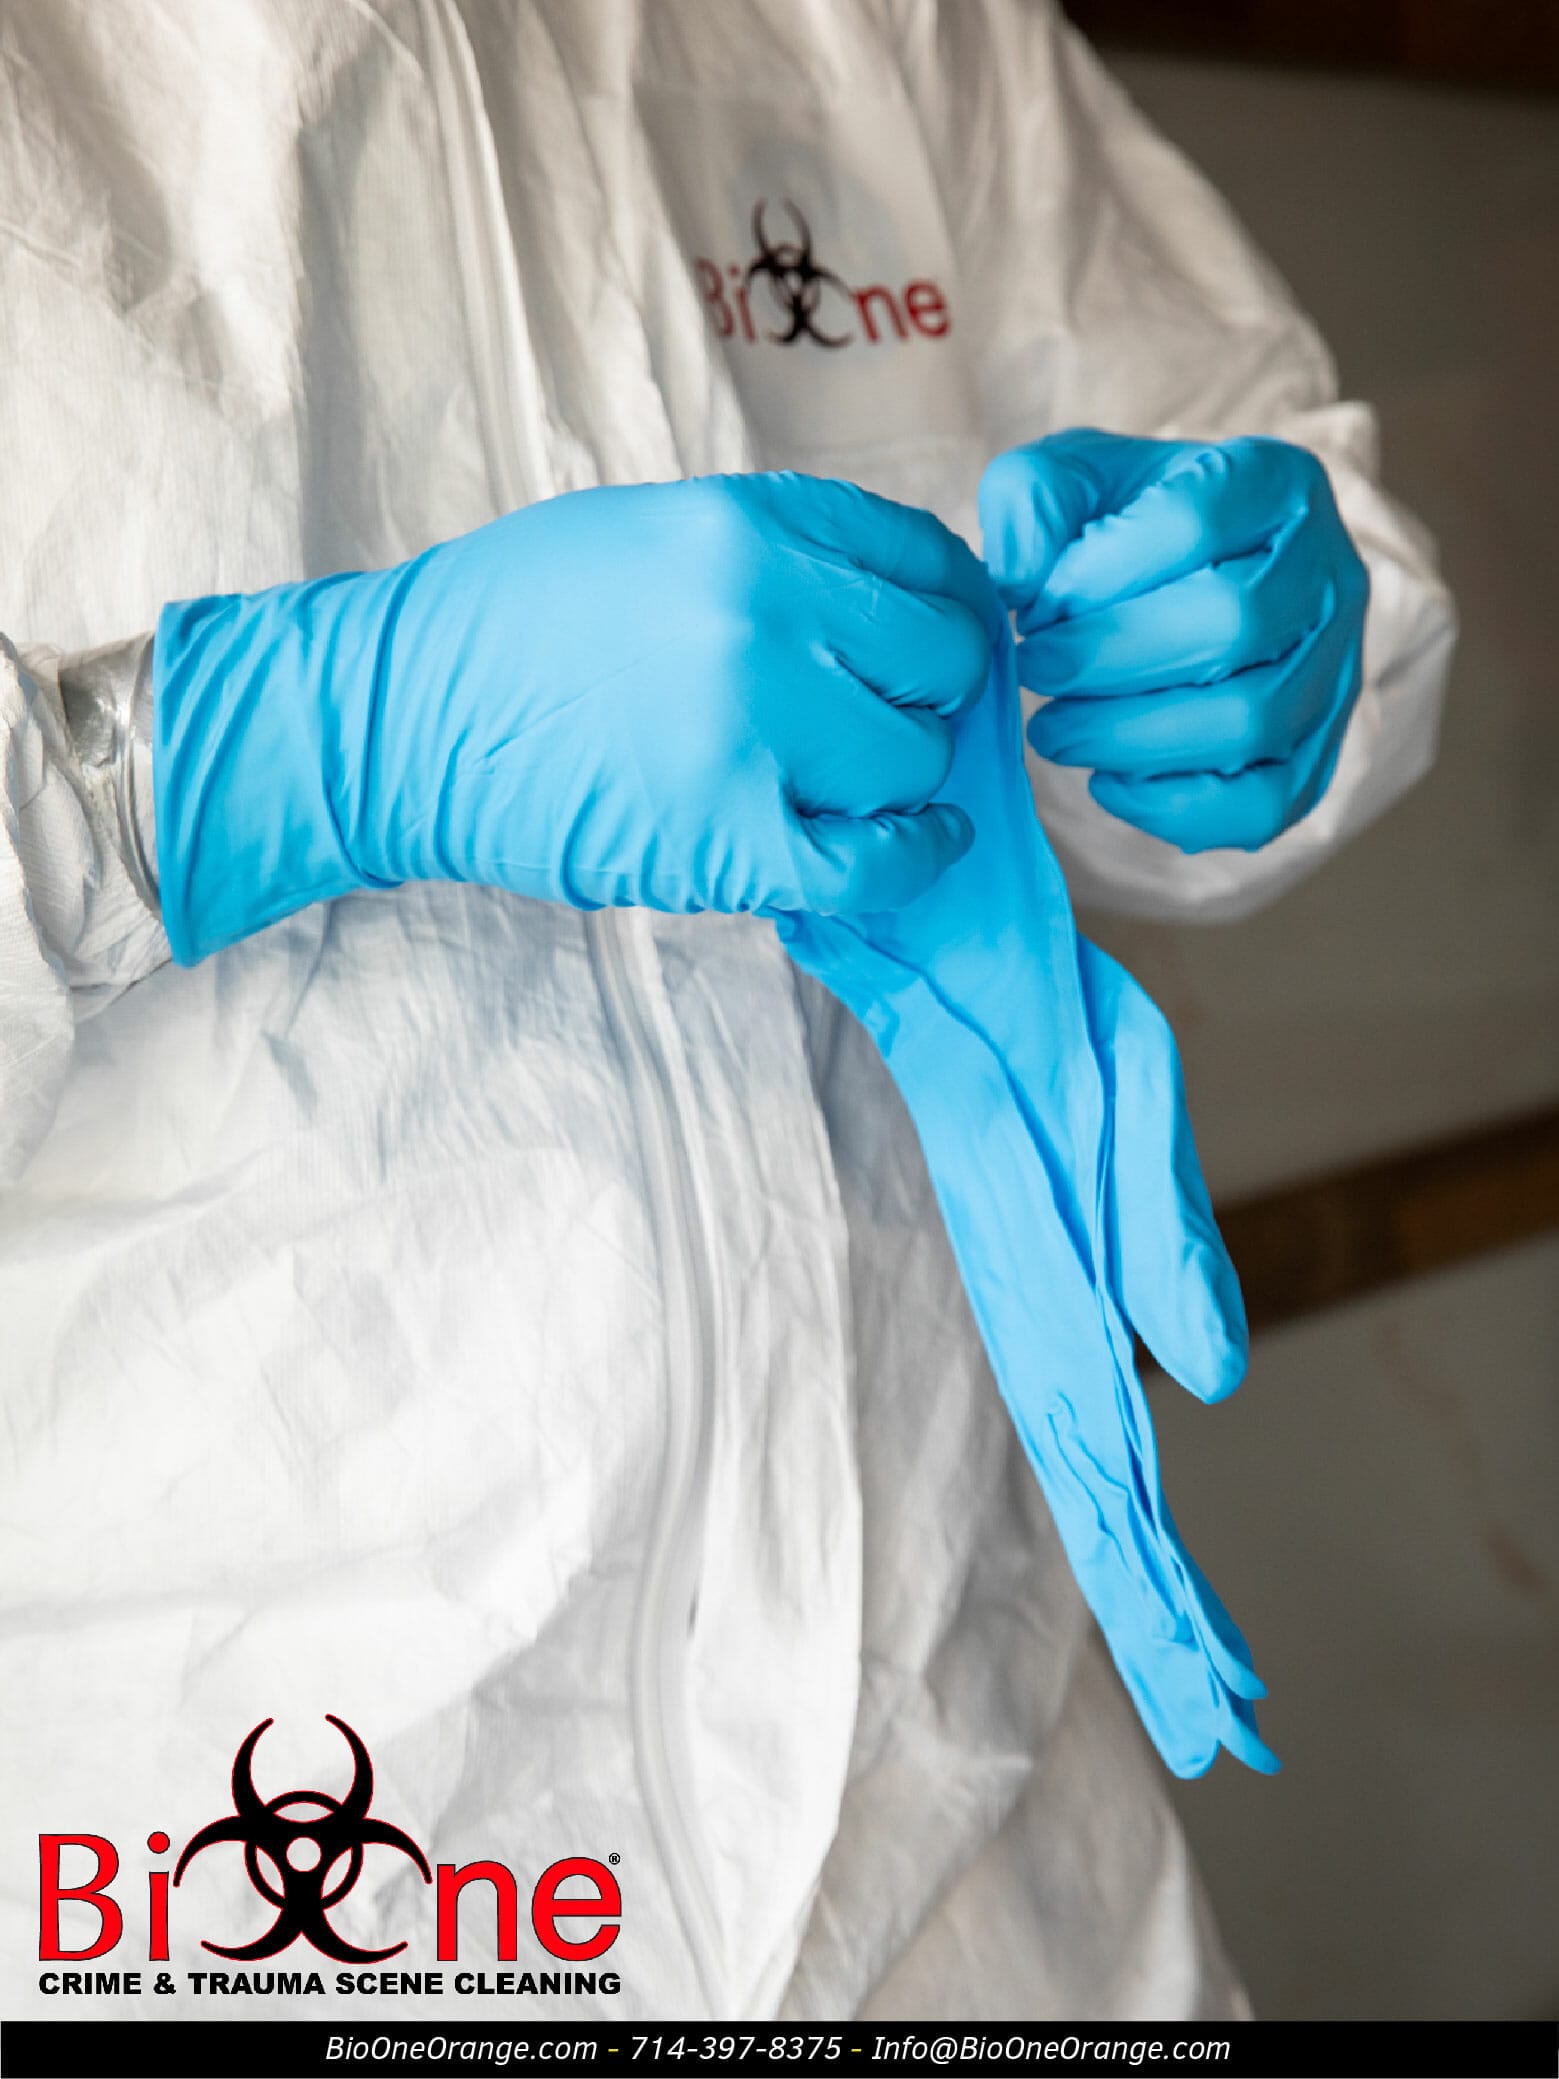 Image shows Bio-One restoration technician wearing nitrile gloves (PPE).